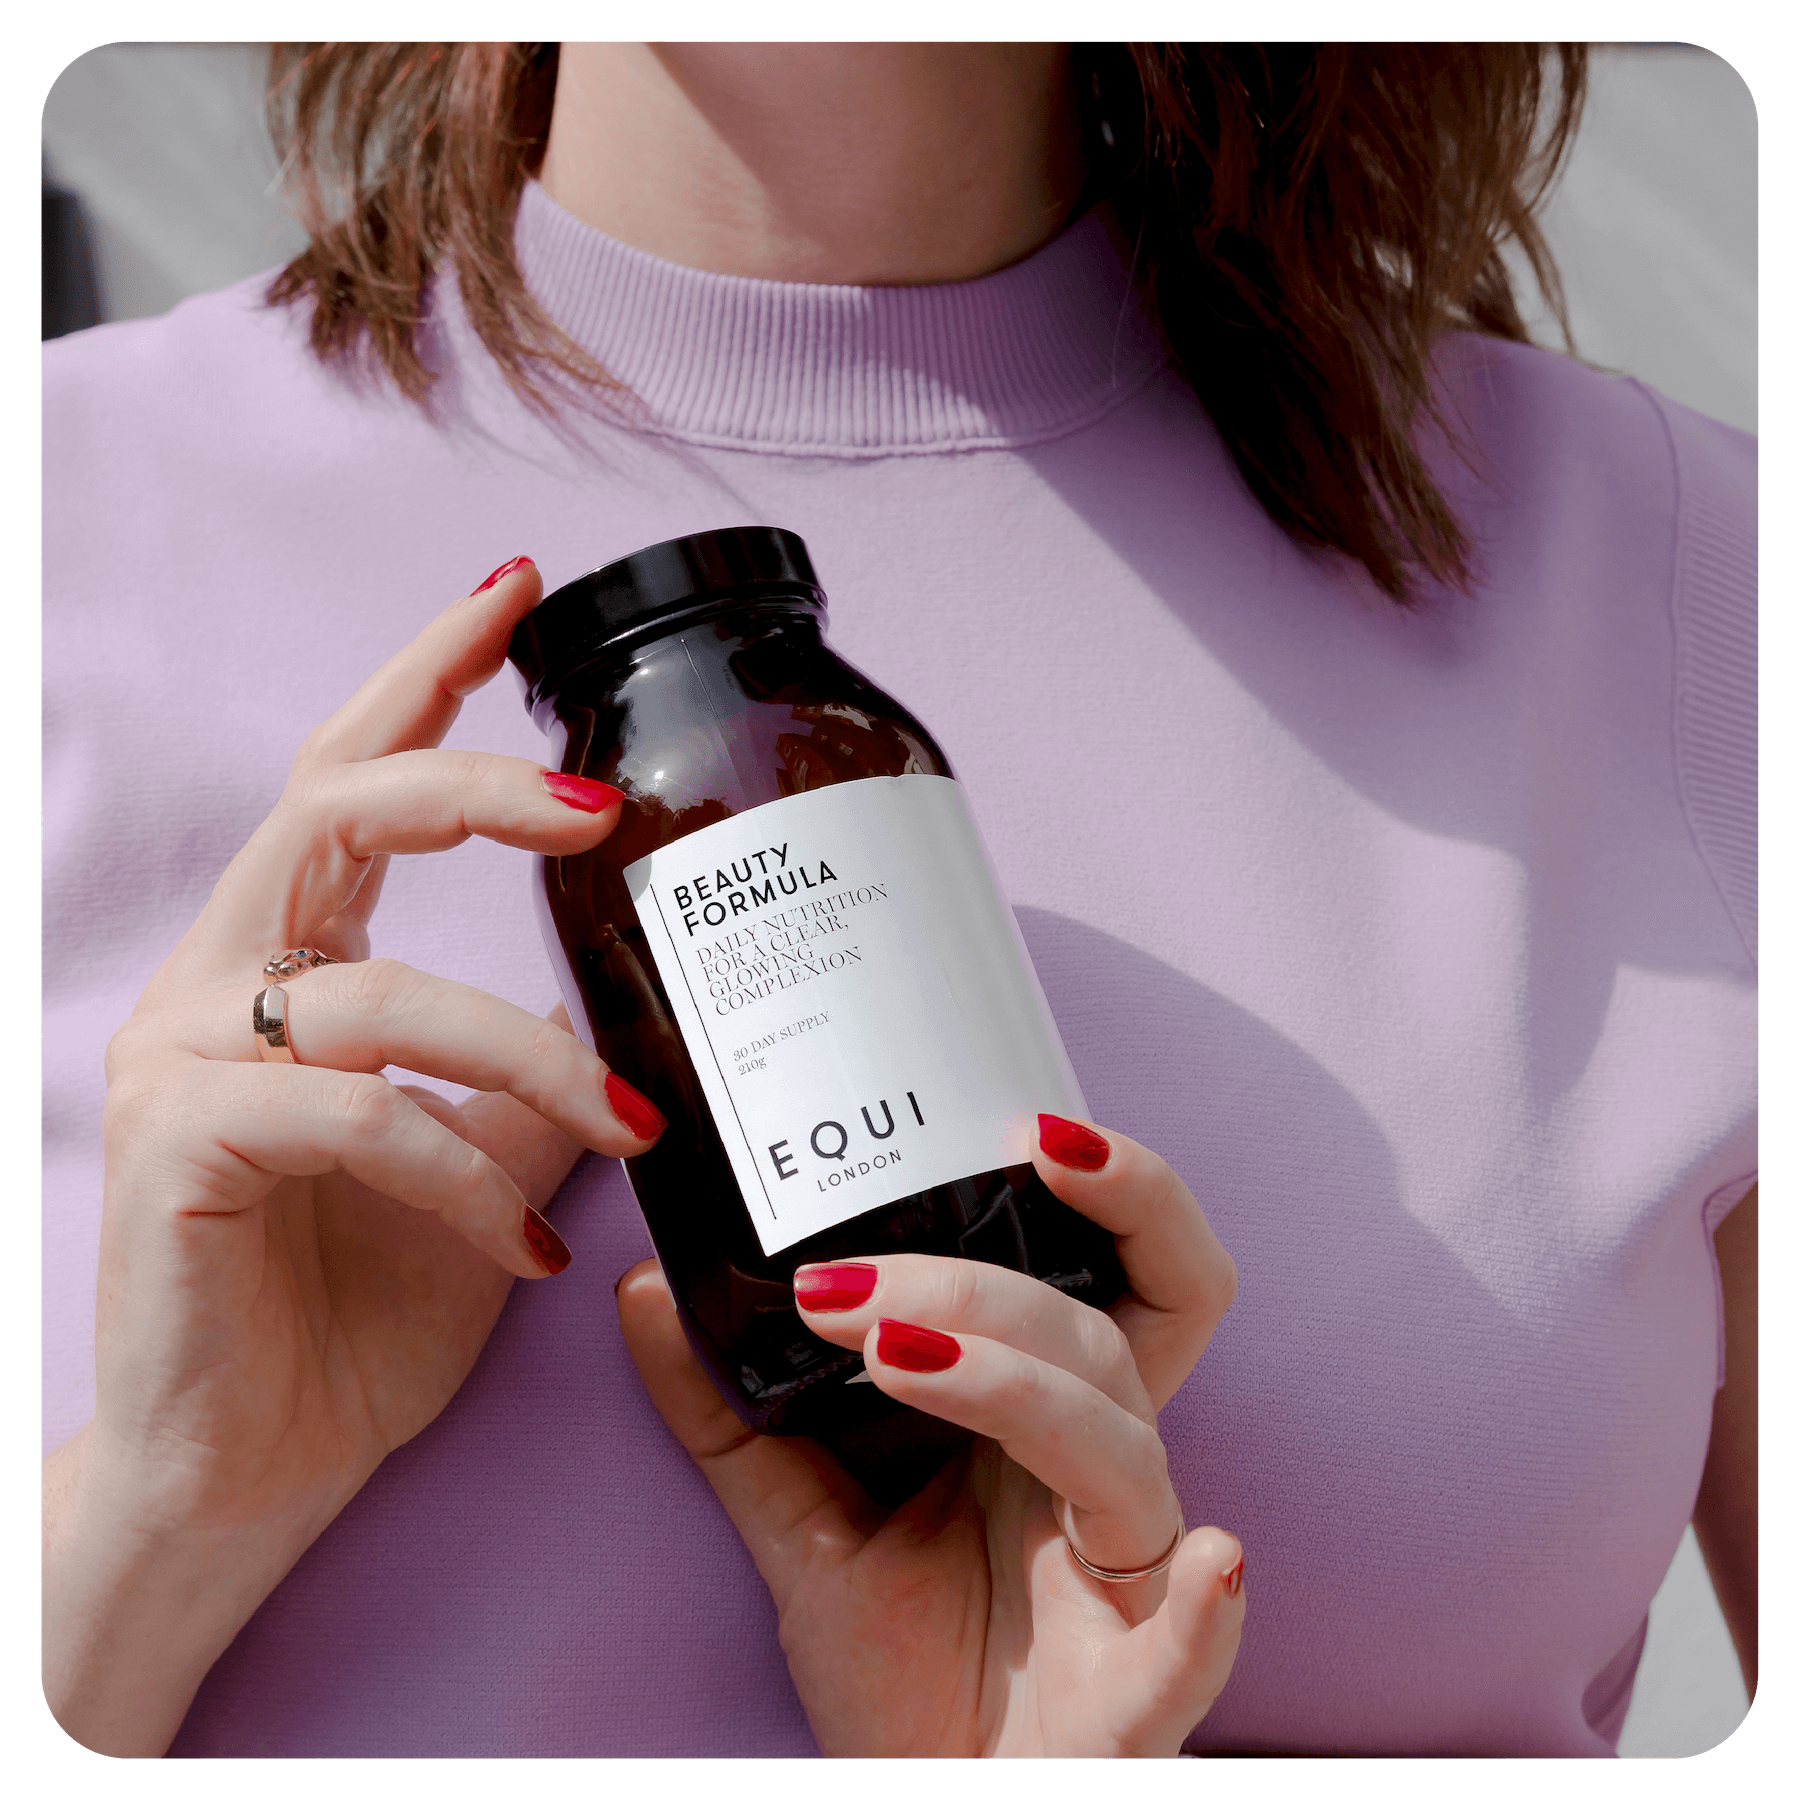 Women with a lilac top holding a jar of Beauty Formula